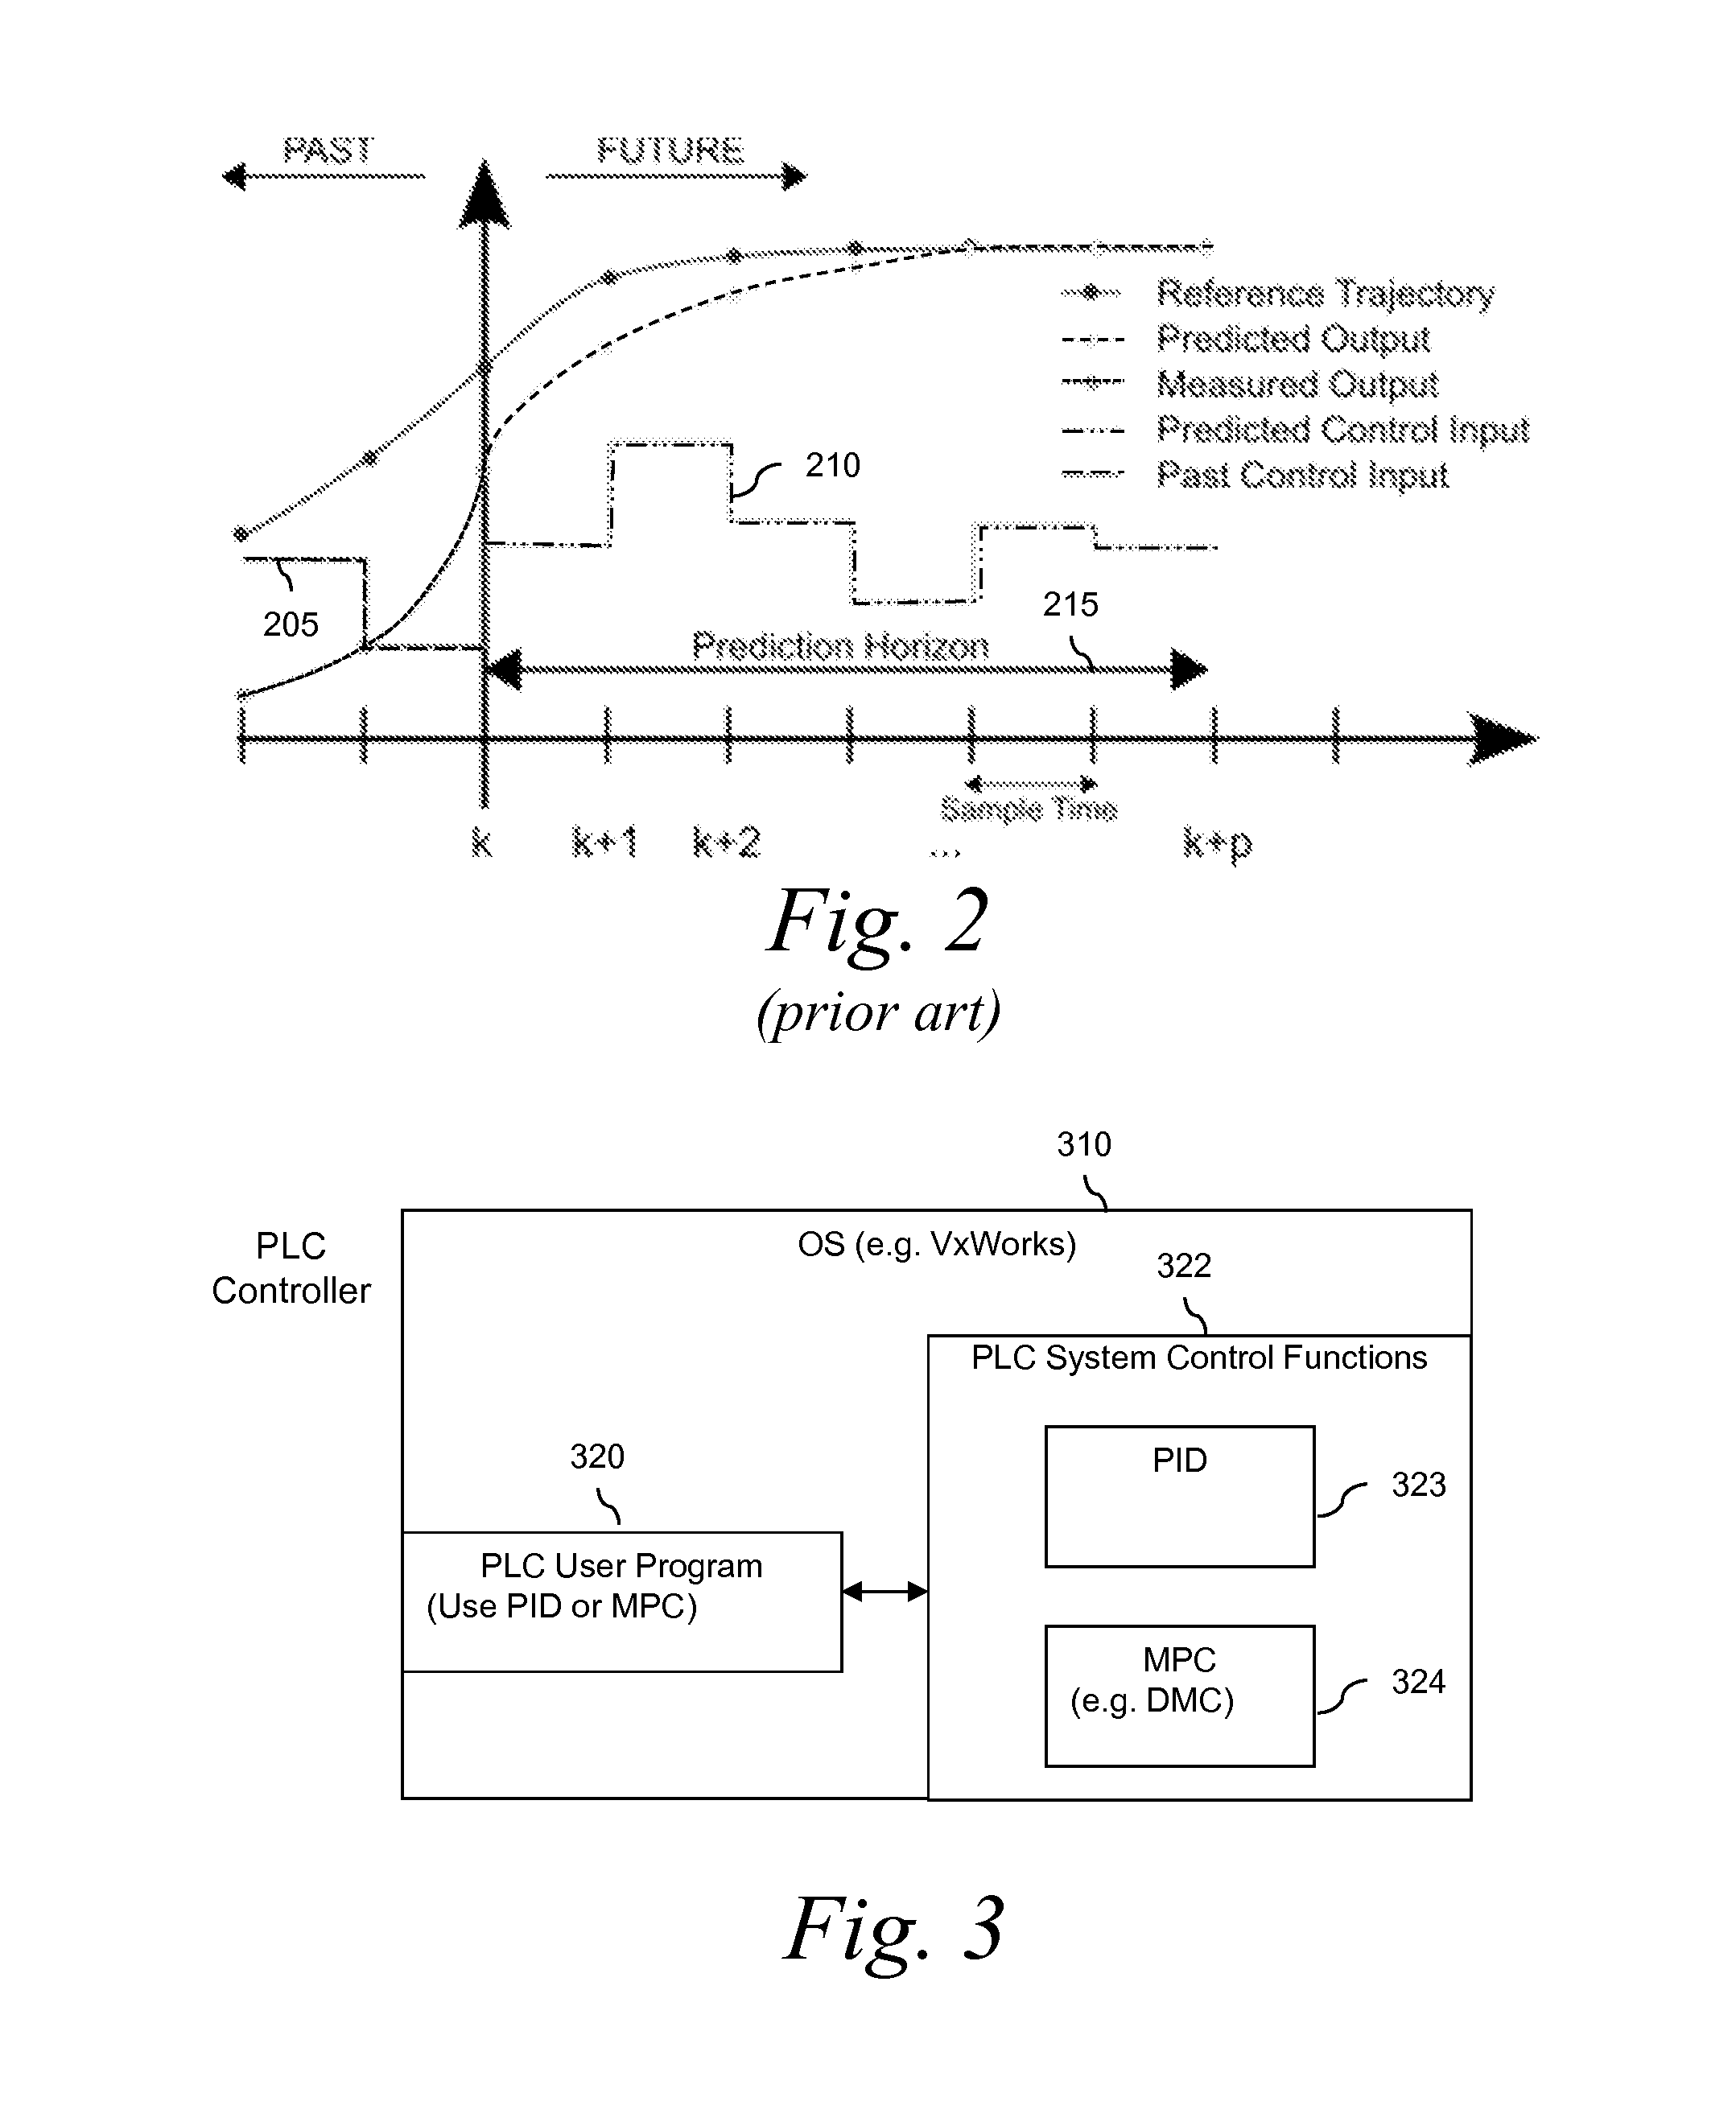 System and method for implementing model predictive control in PLC